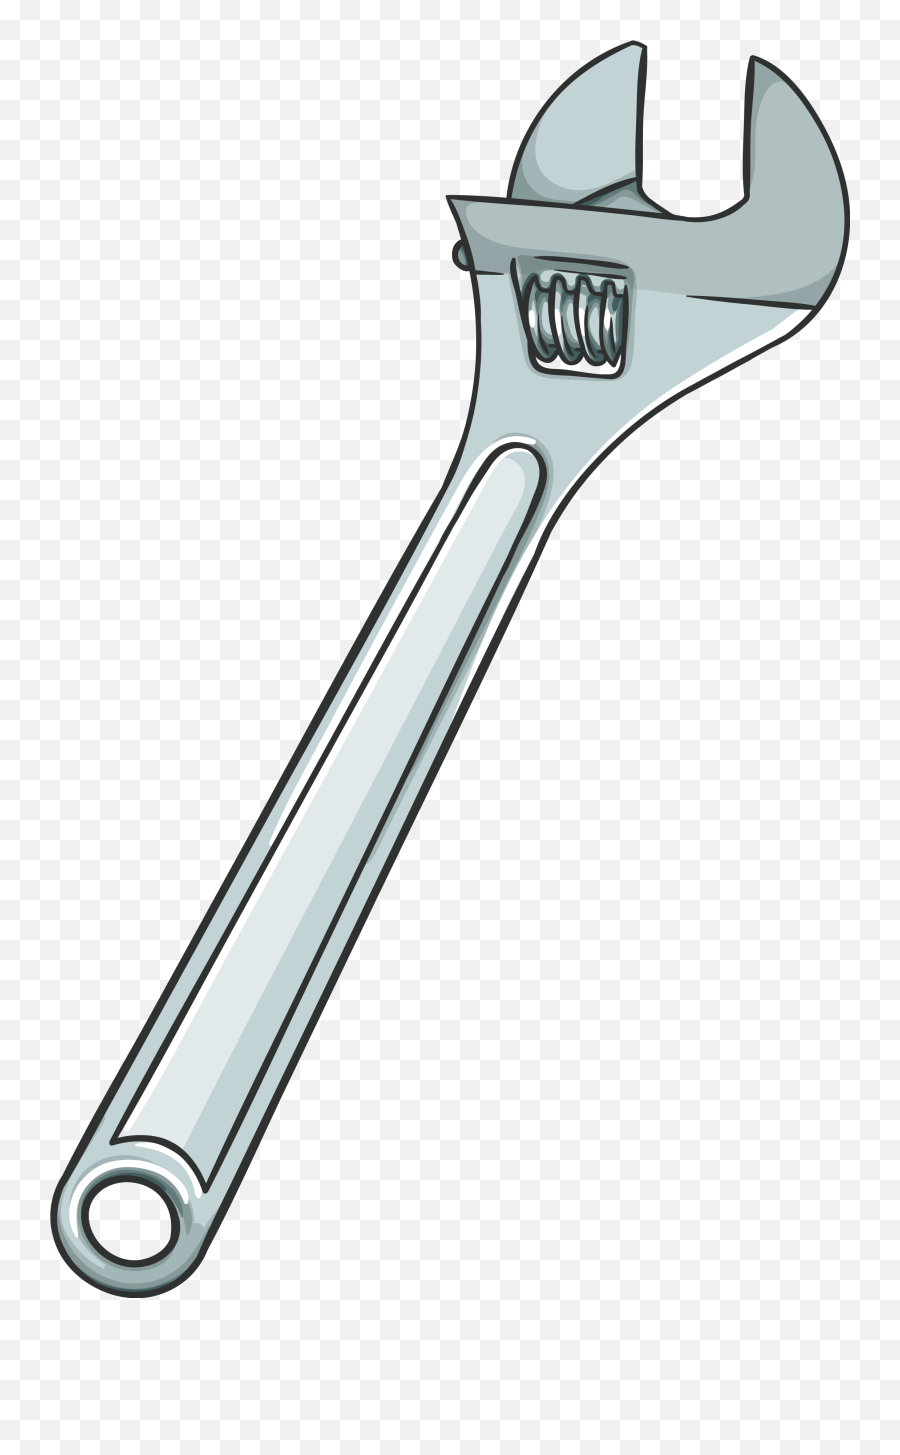 Adjustable Spanner Wrench Download - Wrench Transparent Background Png,Wrench Transparent Background